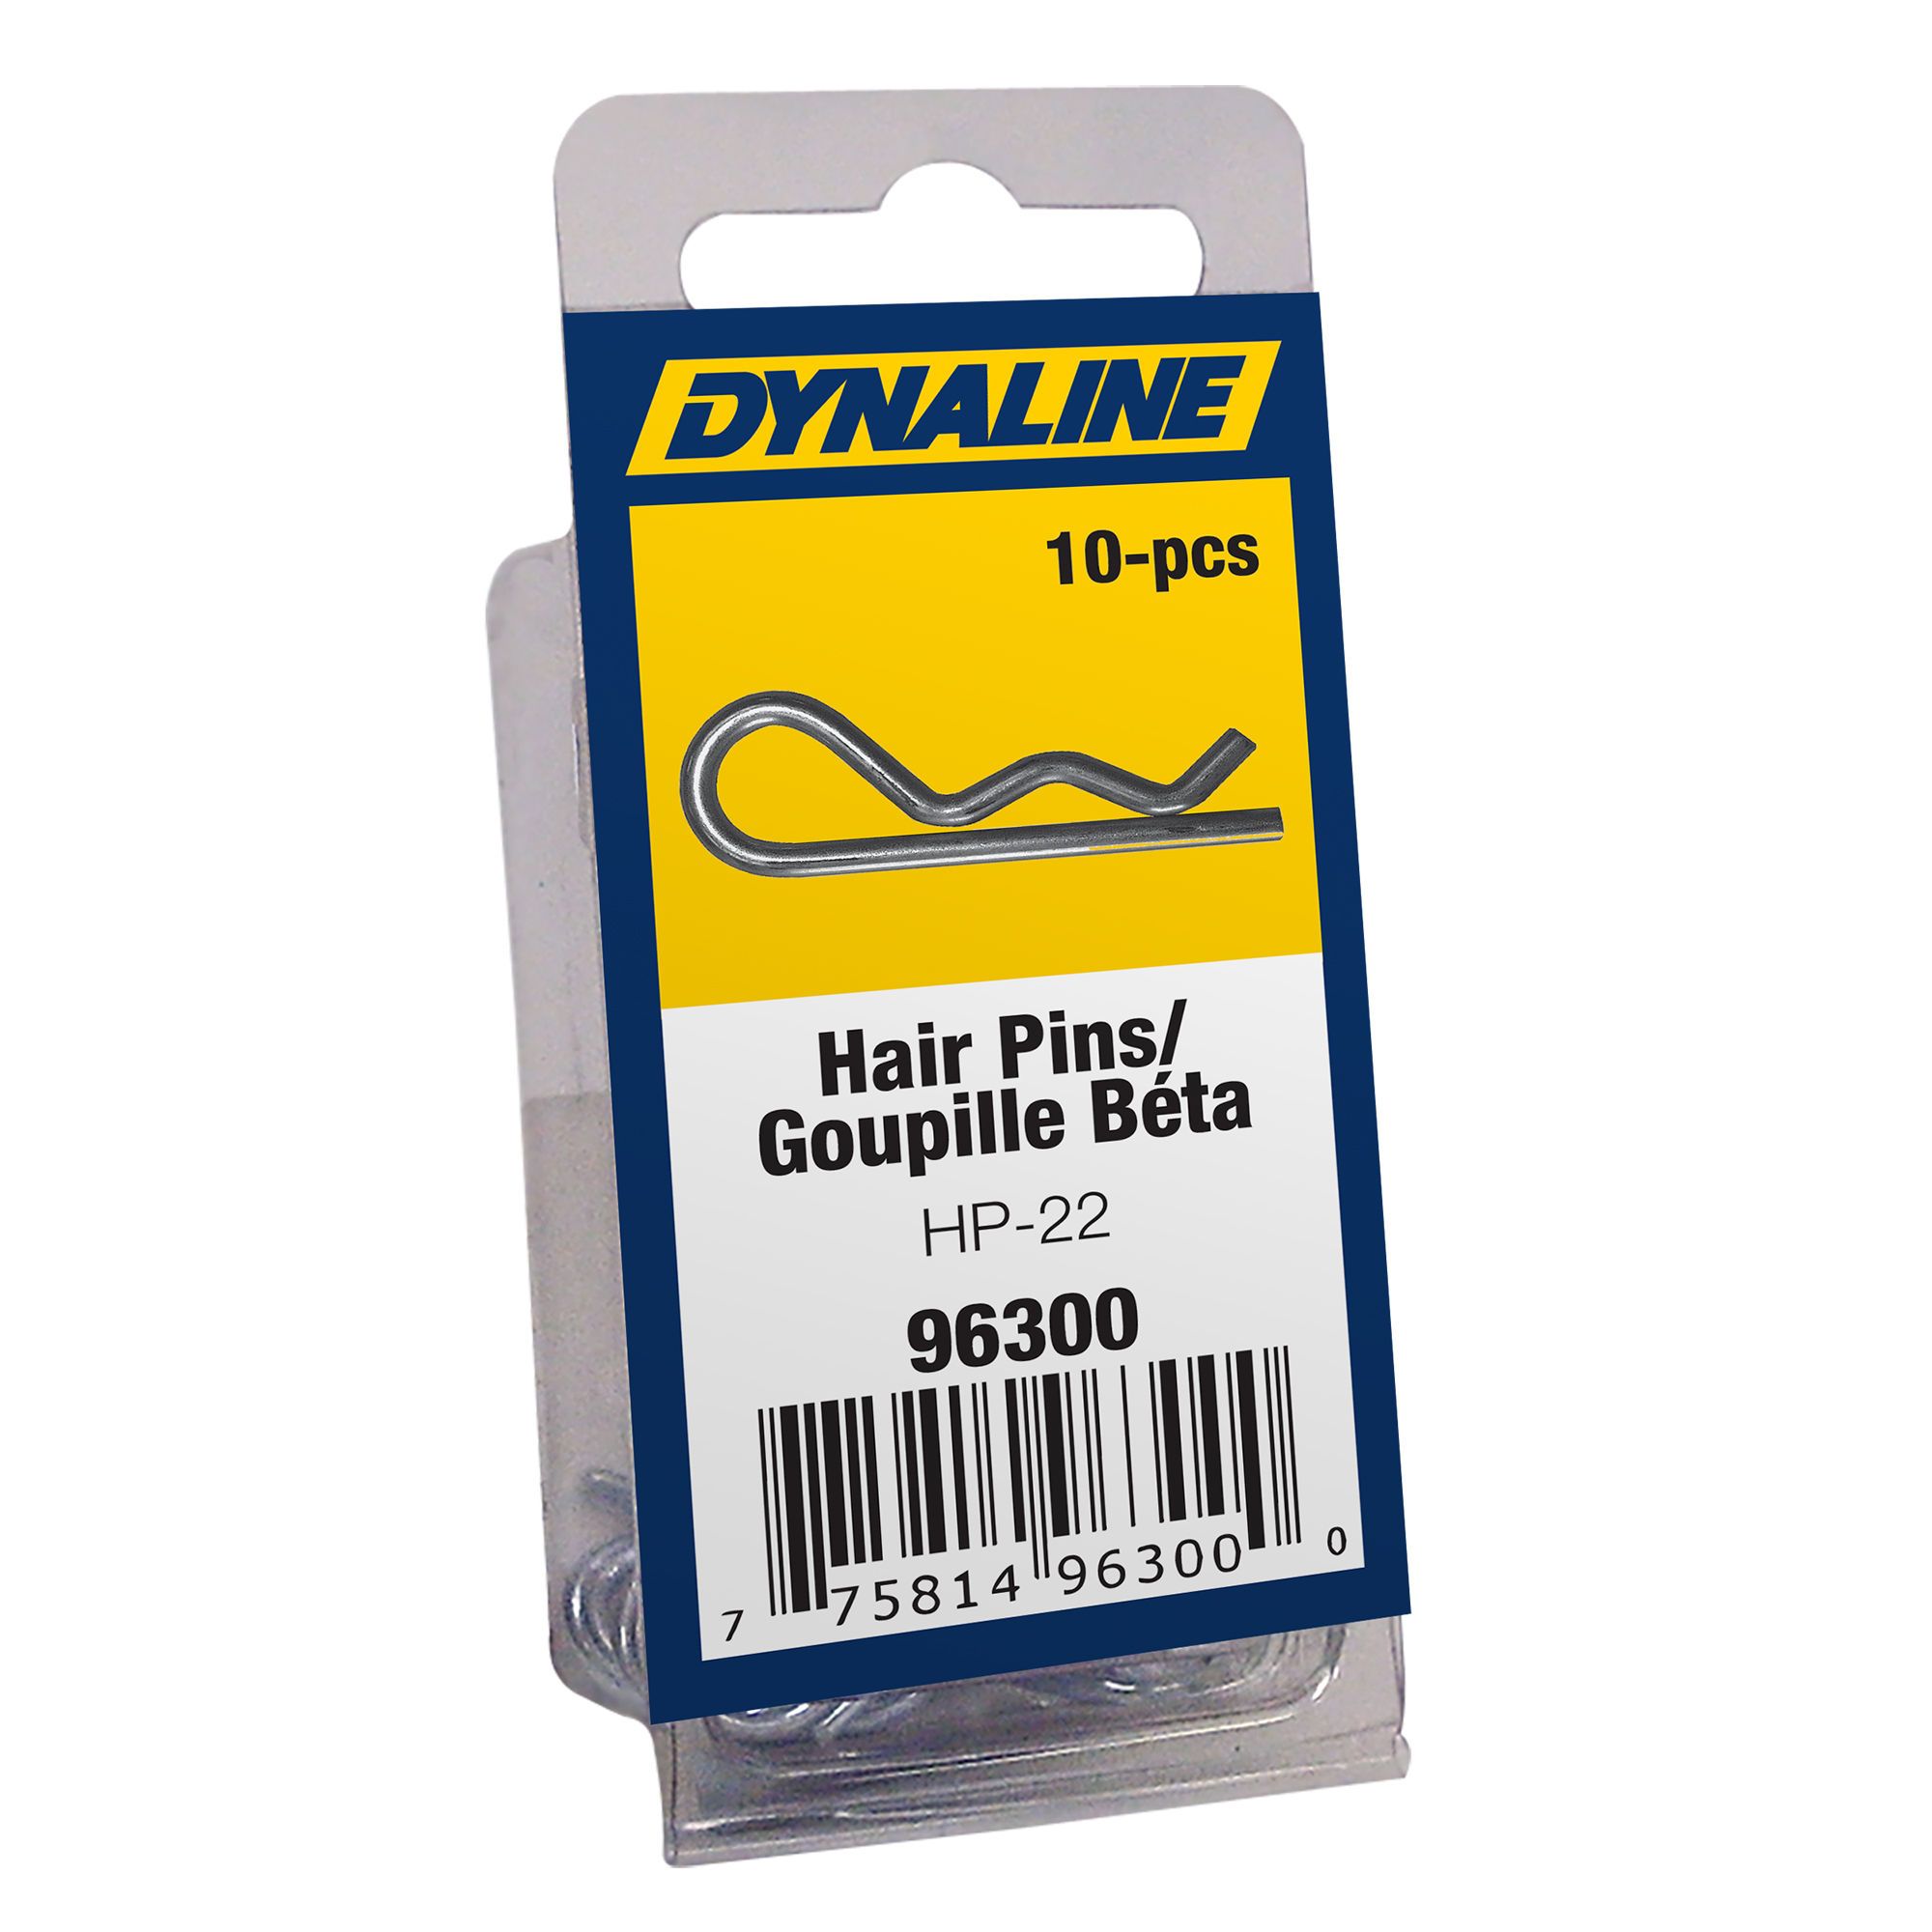 Hair pin clips - Internal from DYNALINE